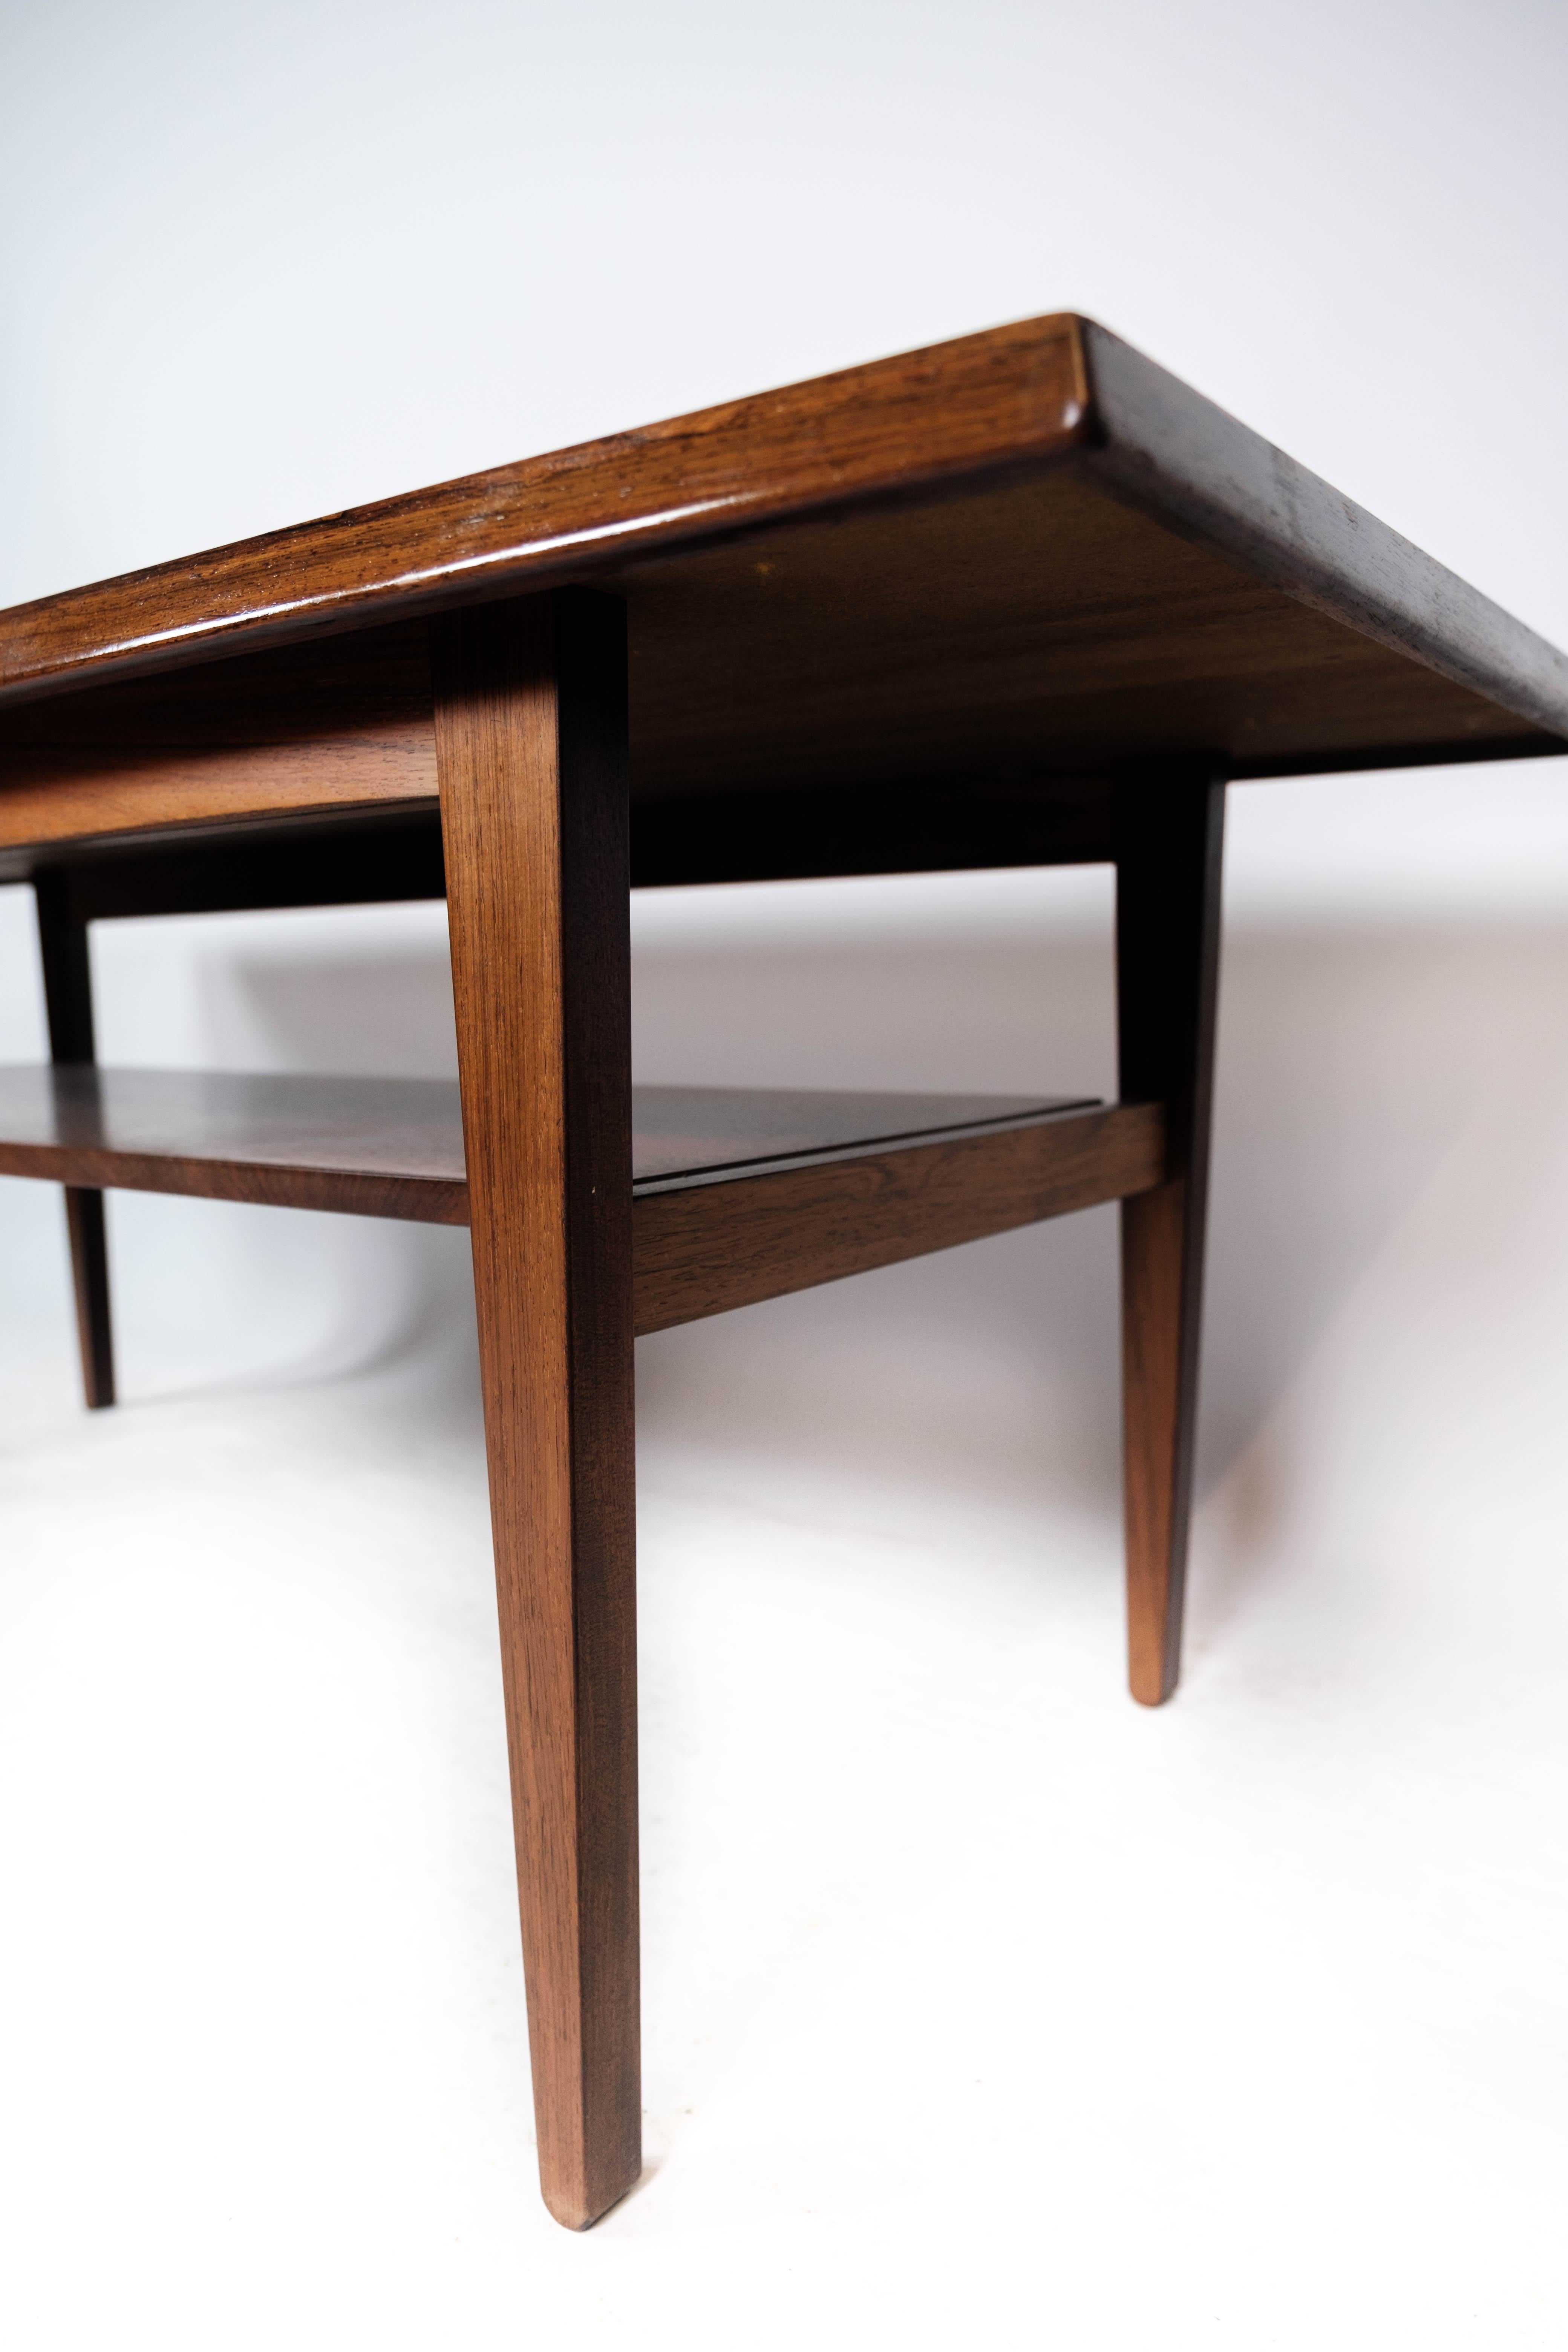 Danish Coffee Table Made In Rosewood With Shelf From 1960s For Sale